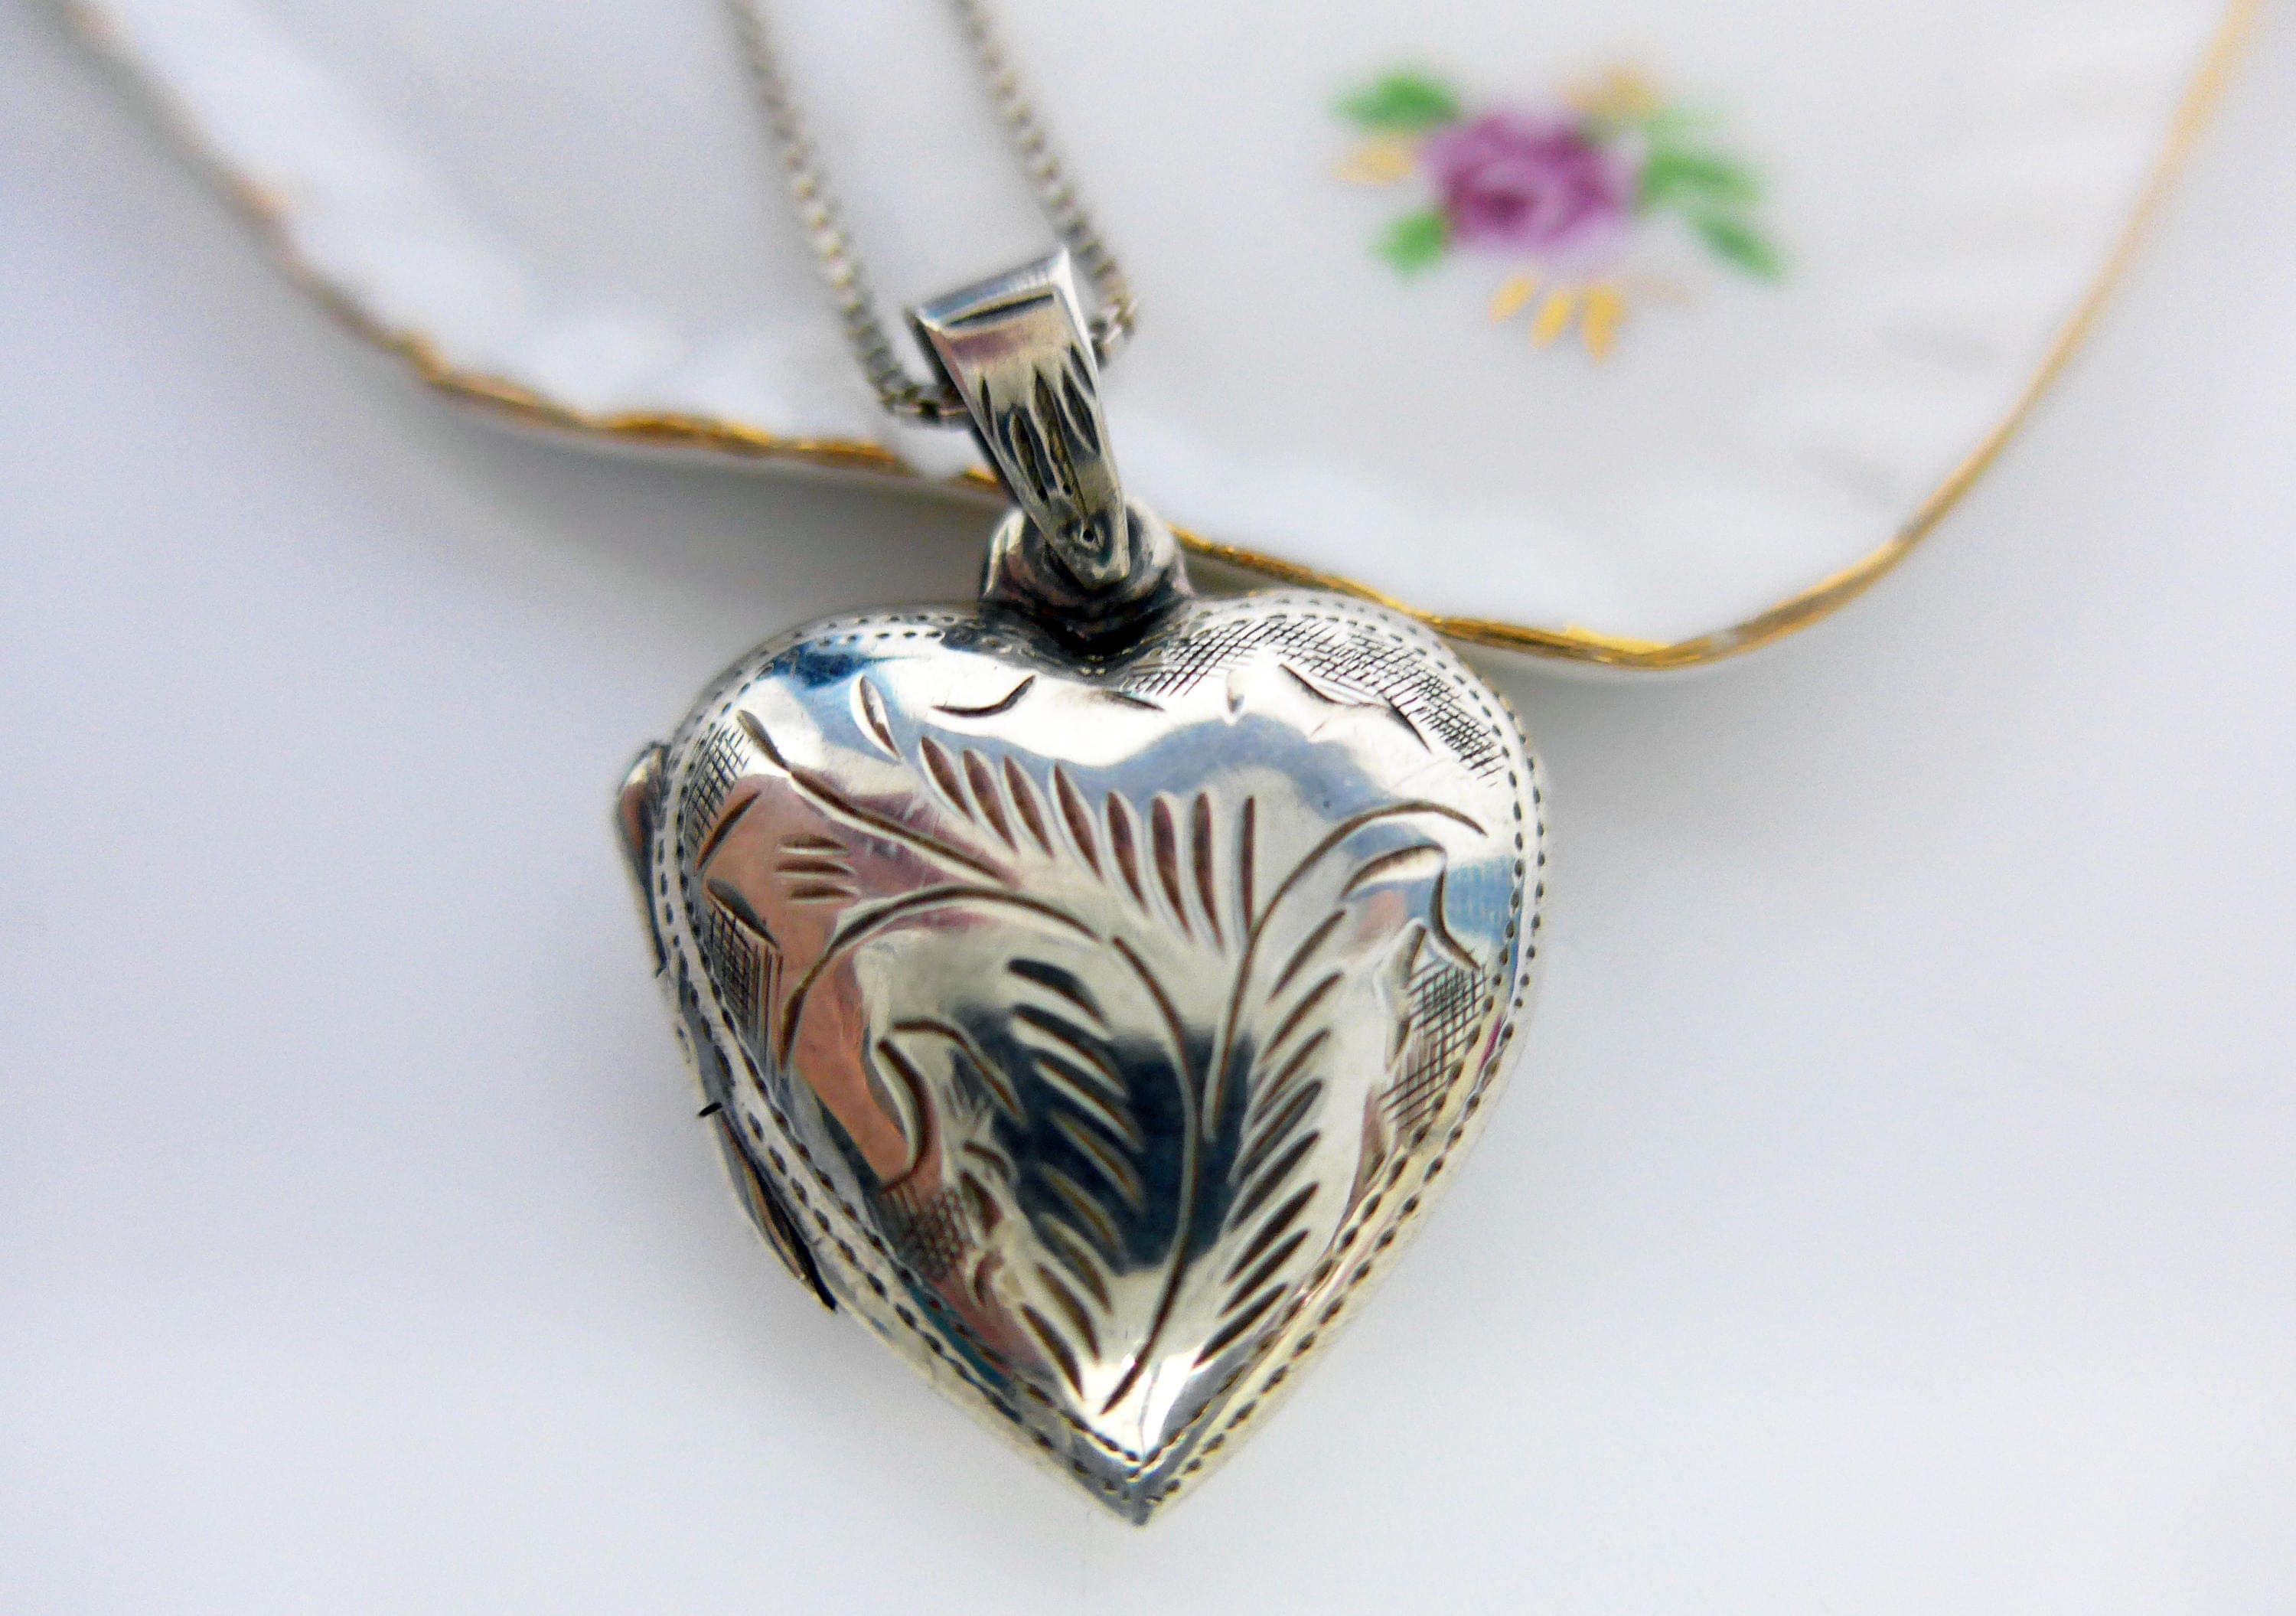 Vintage Sterling Silver Etched Heart Locket Necklace Retro 925 Puffy Heart Photo Pendant On 